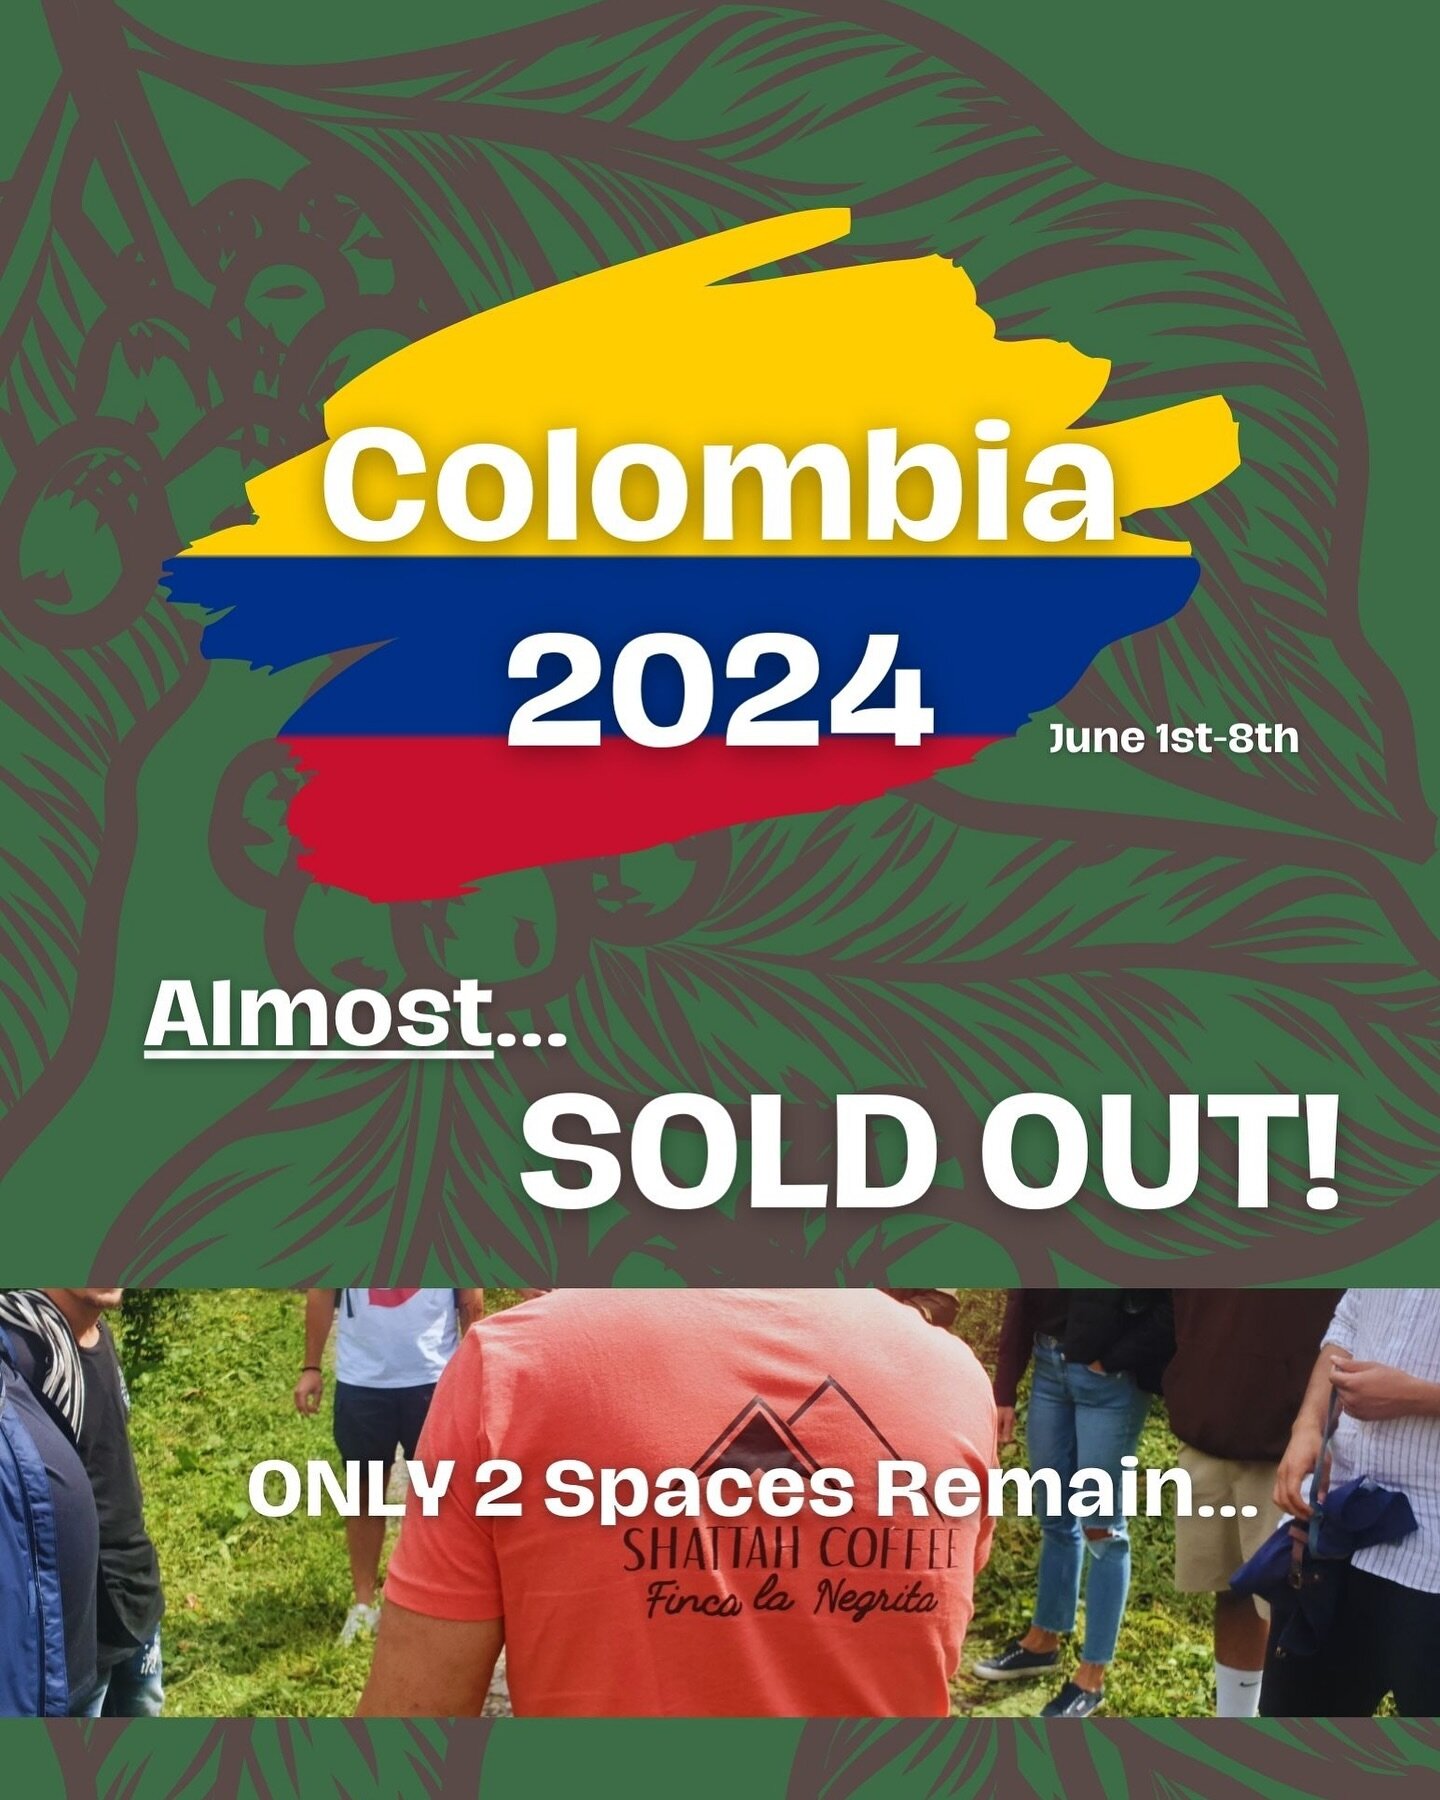 2 spaces left on our Colombia 2024 trip! Visit the famous Shattah farm, Finca La Negrita and complete our Soil to Cup Course - message us now or sign up via website - hurry though, limited spaces remaining!
-
-
#3Coffeeguys #coffee #coffeefarm #kenya